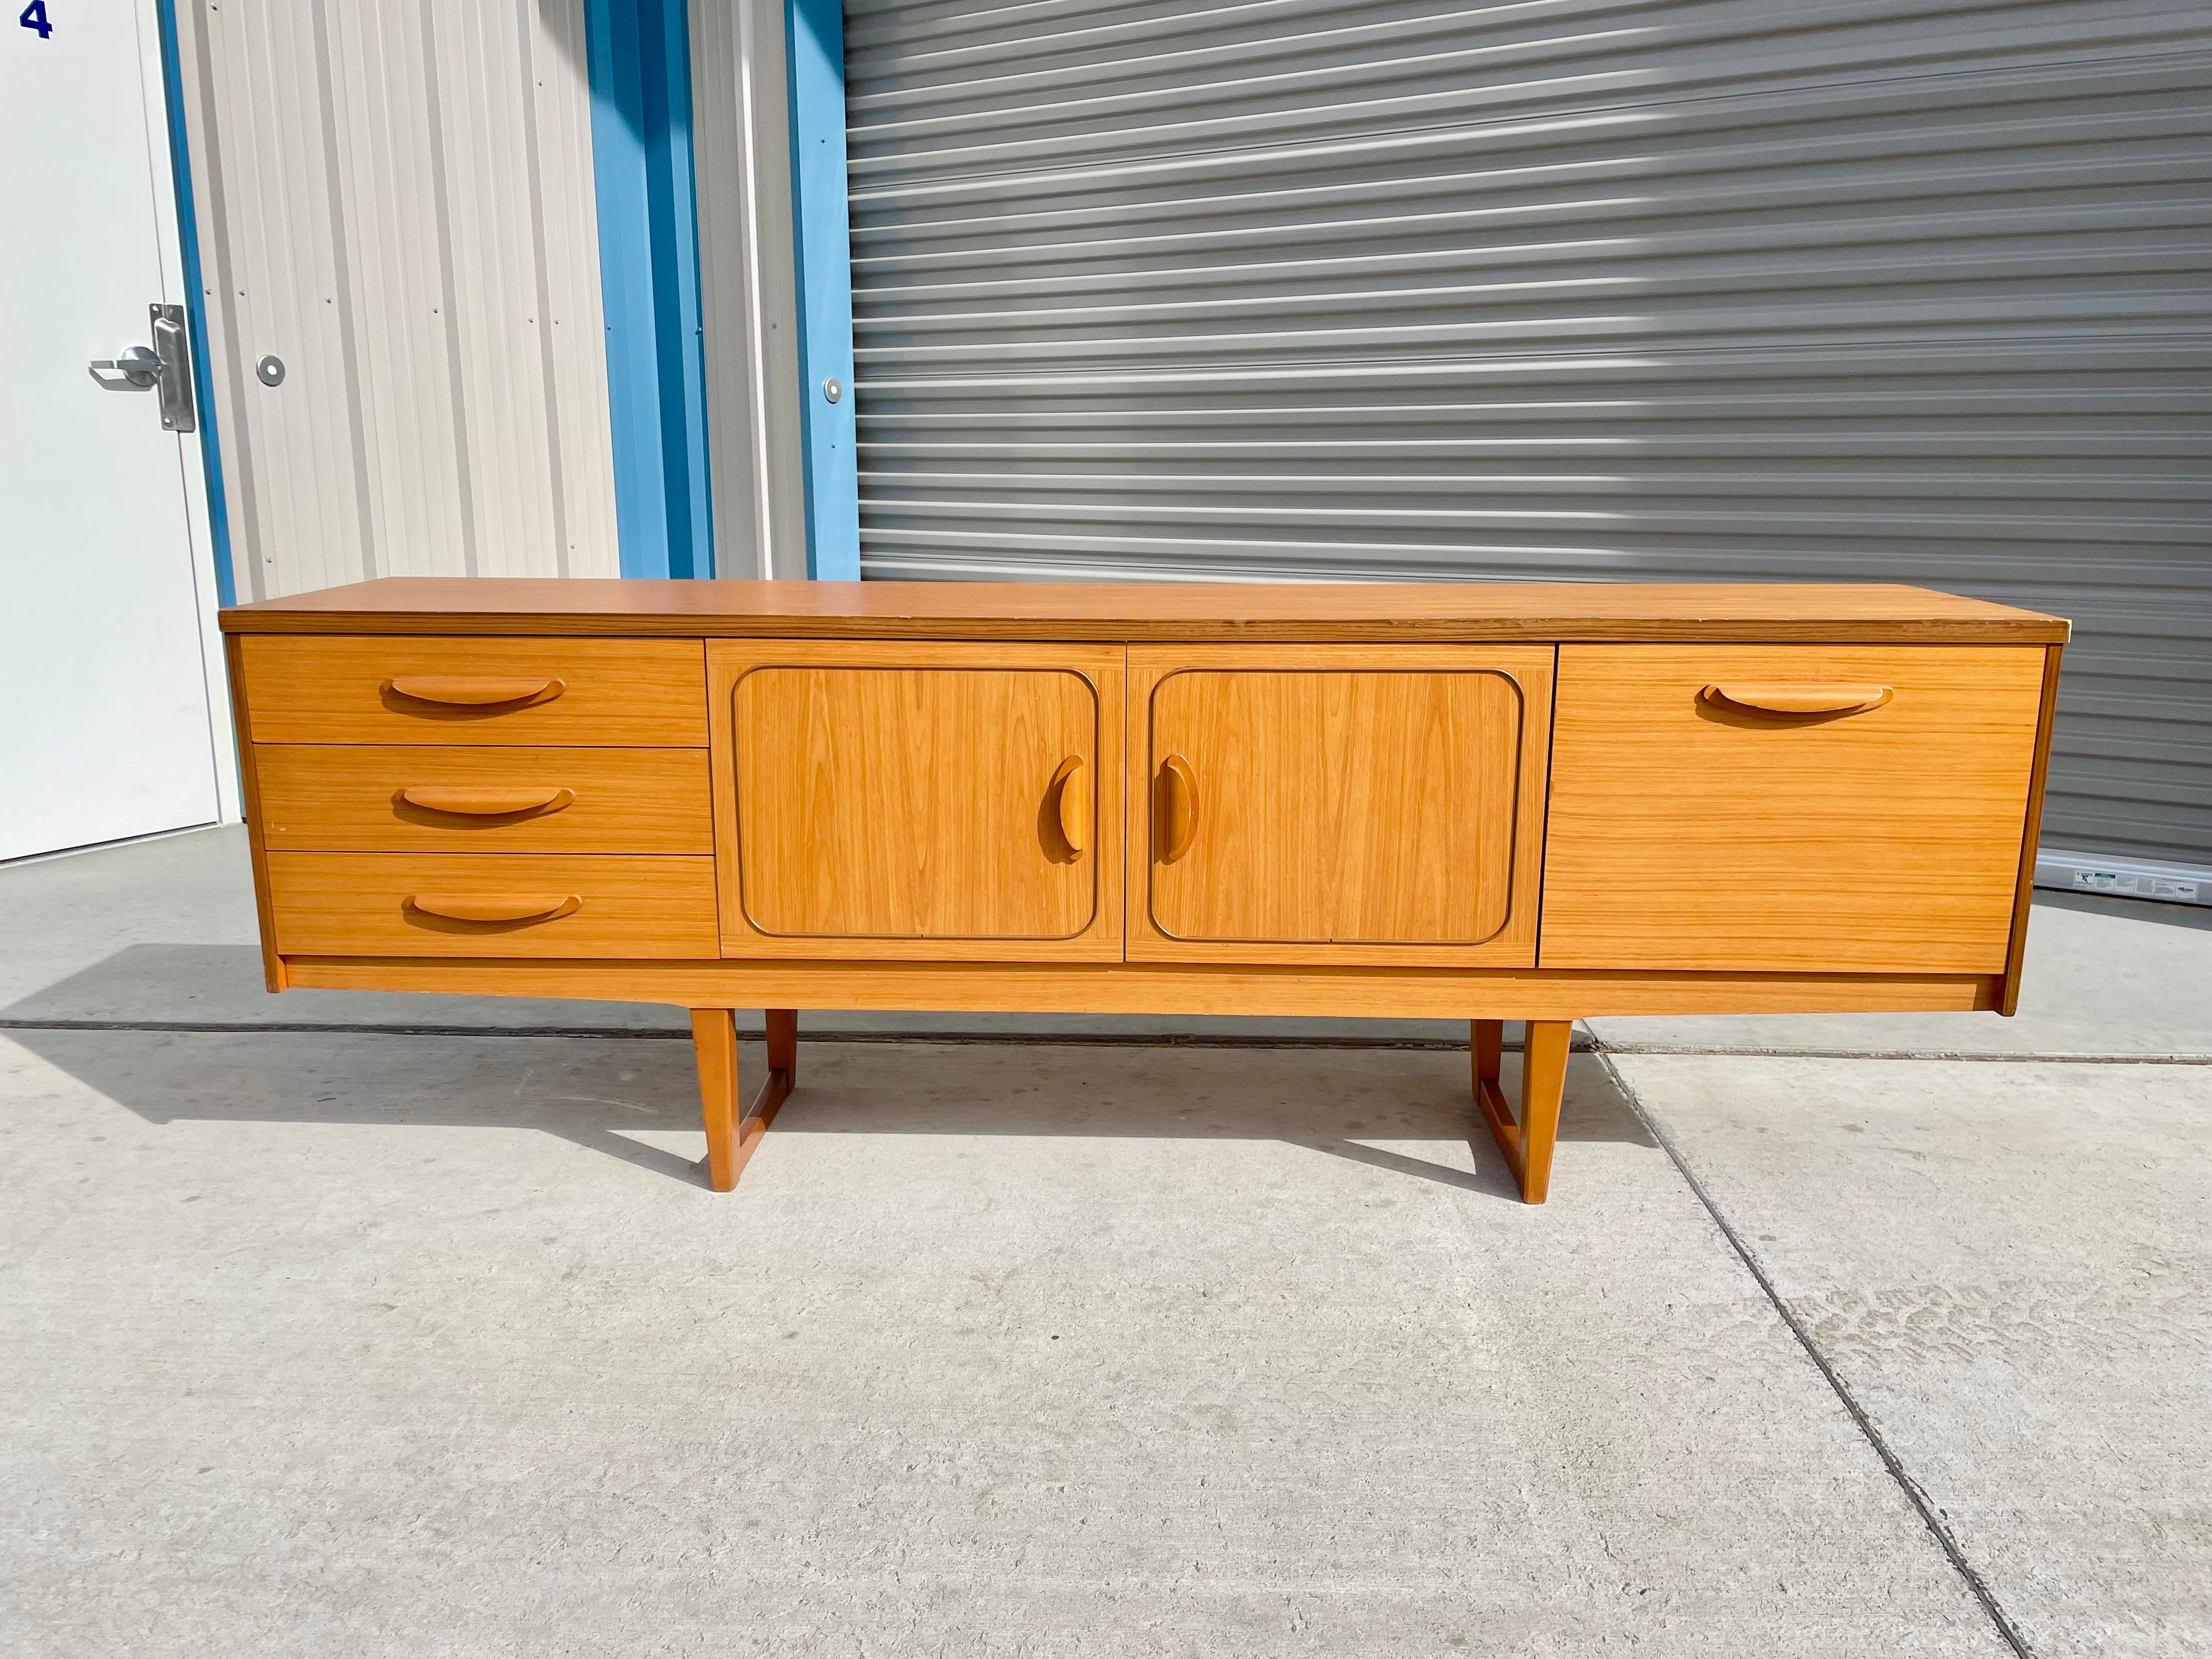 This fantastic danish modern teak credenza was designed and manufactured by Drylund in Denmark circa 1960s. This danish modern credenza features three pull-out drawers and a center two-door cabinet with lovely sculpted handles giving it an extra